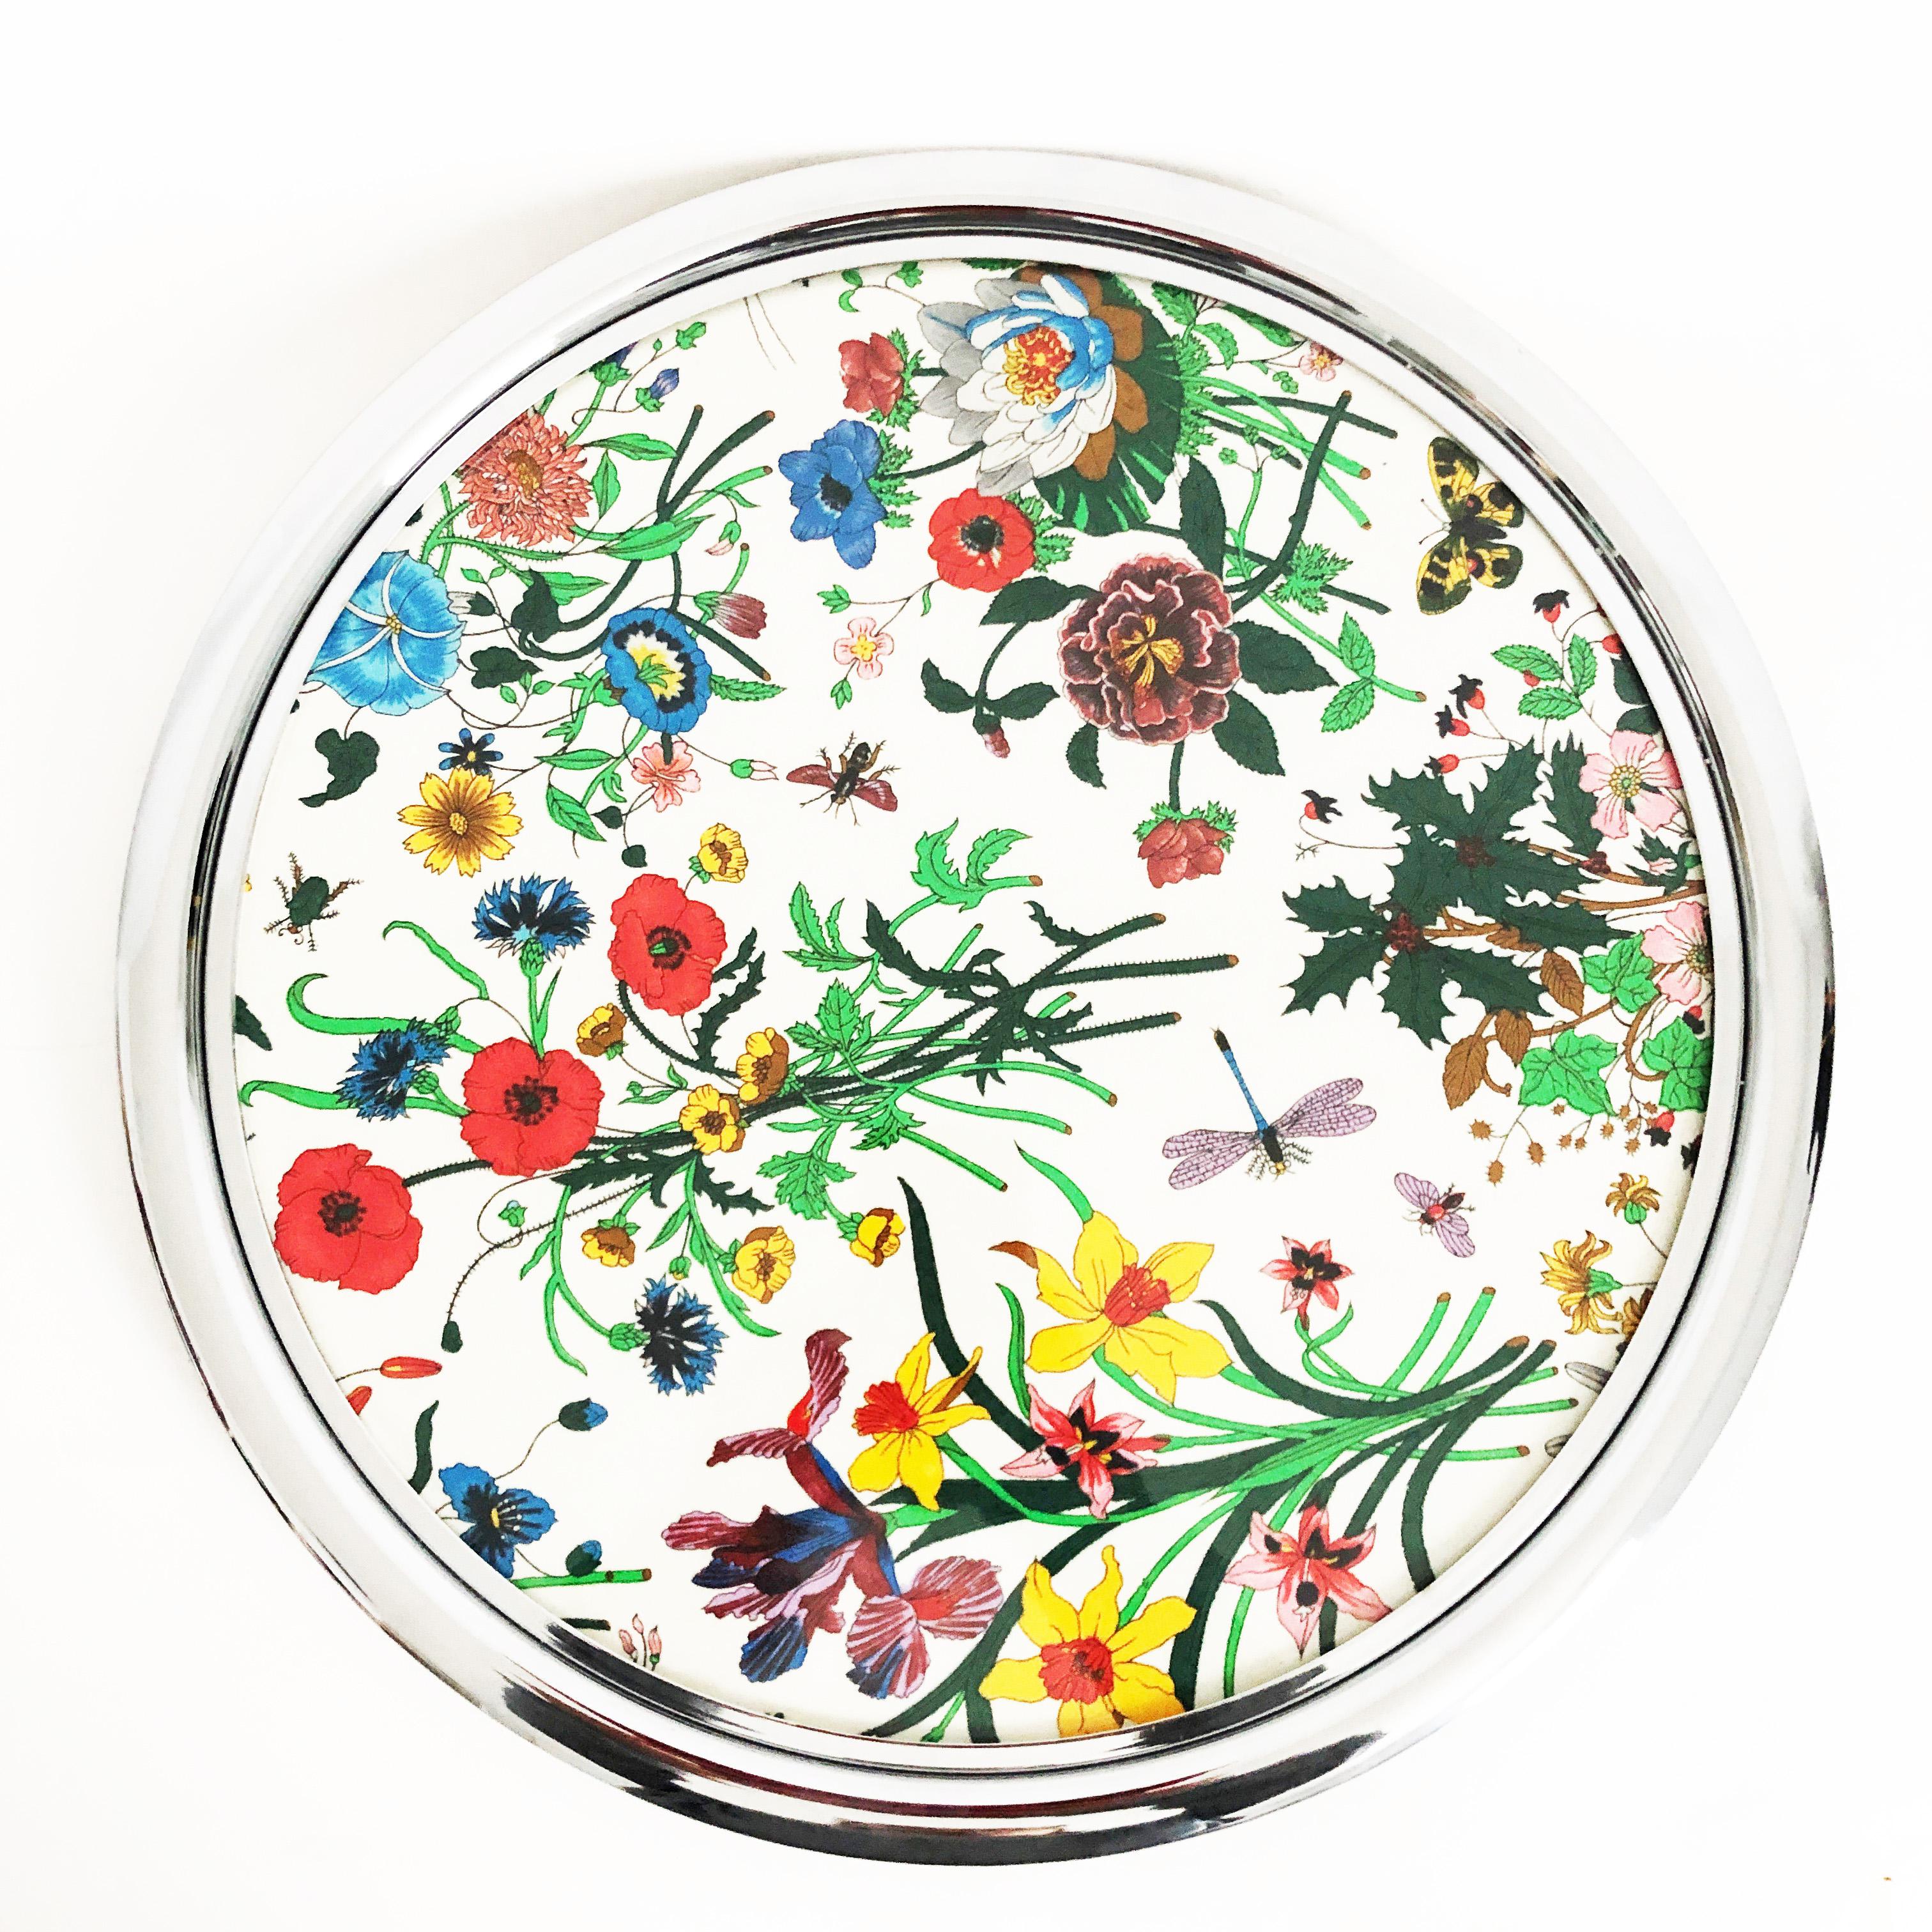 Entertain in style with this rare serving tray or platter from Gucci.  It features Accornero's iconic Flora motif on silk under plexiglas with a silver metal base.  It measures appx 14.5in diameter, making it perfect for serving cocktails or